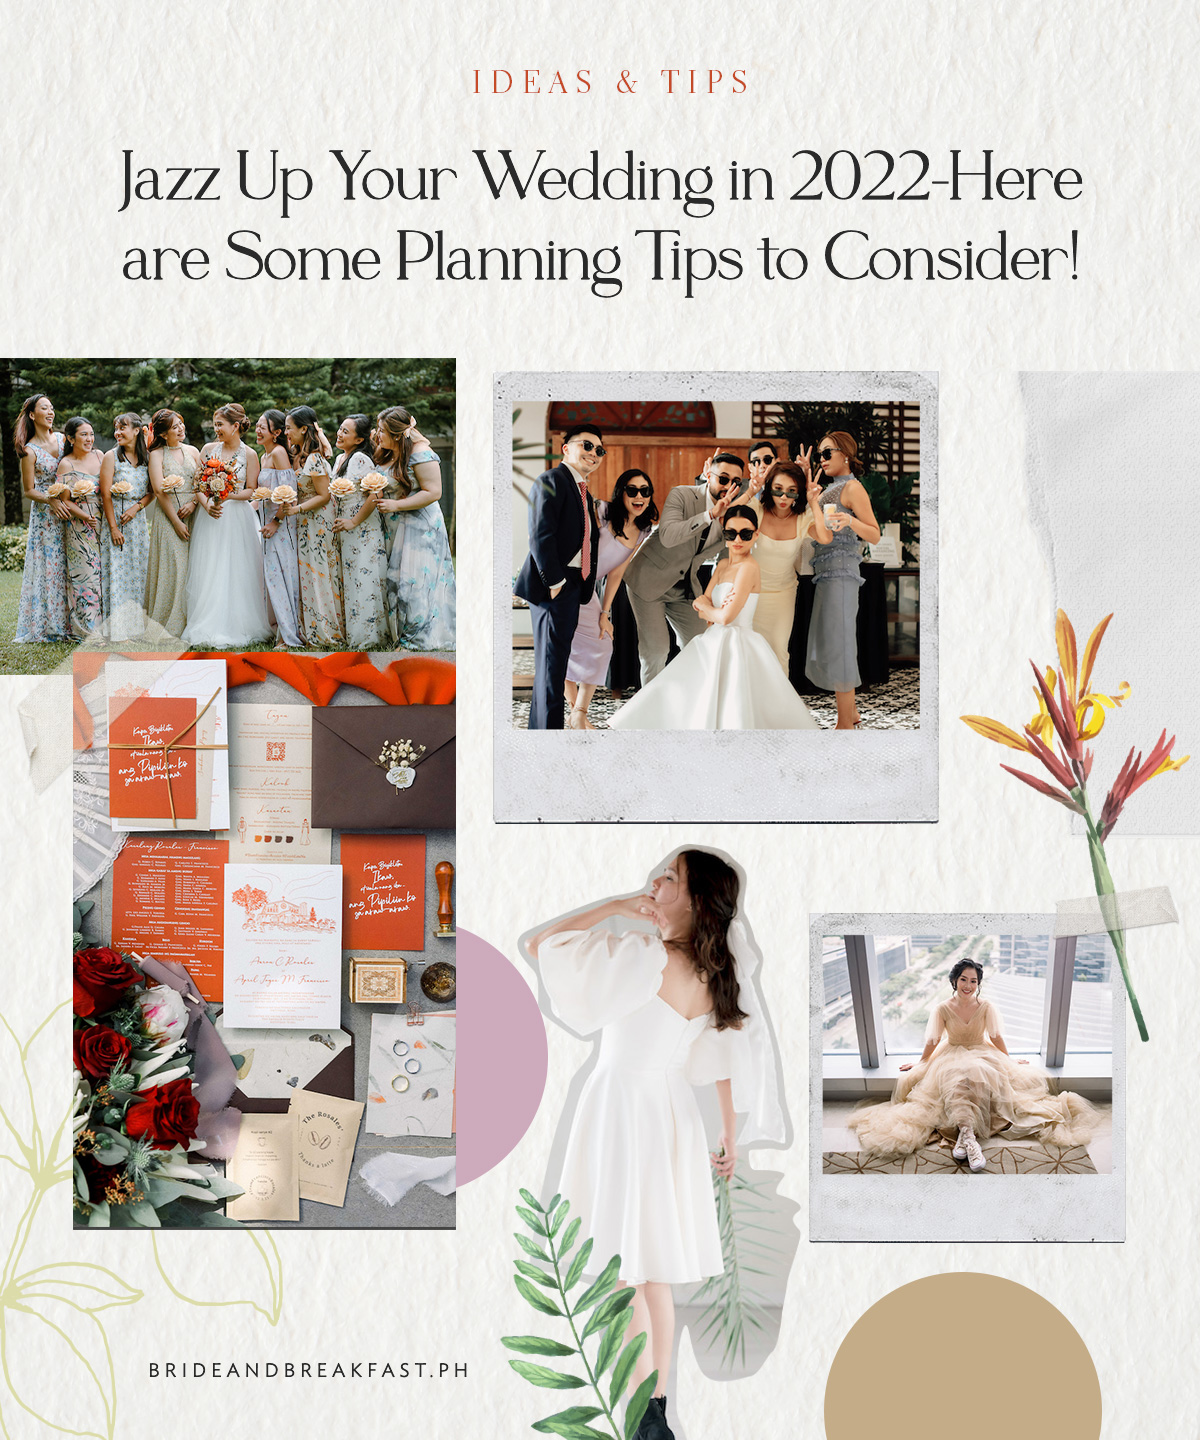 Jazz up your wedding in 2022: Here are some planning tips to consider!